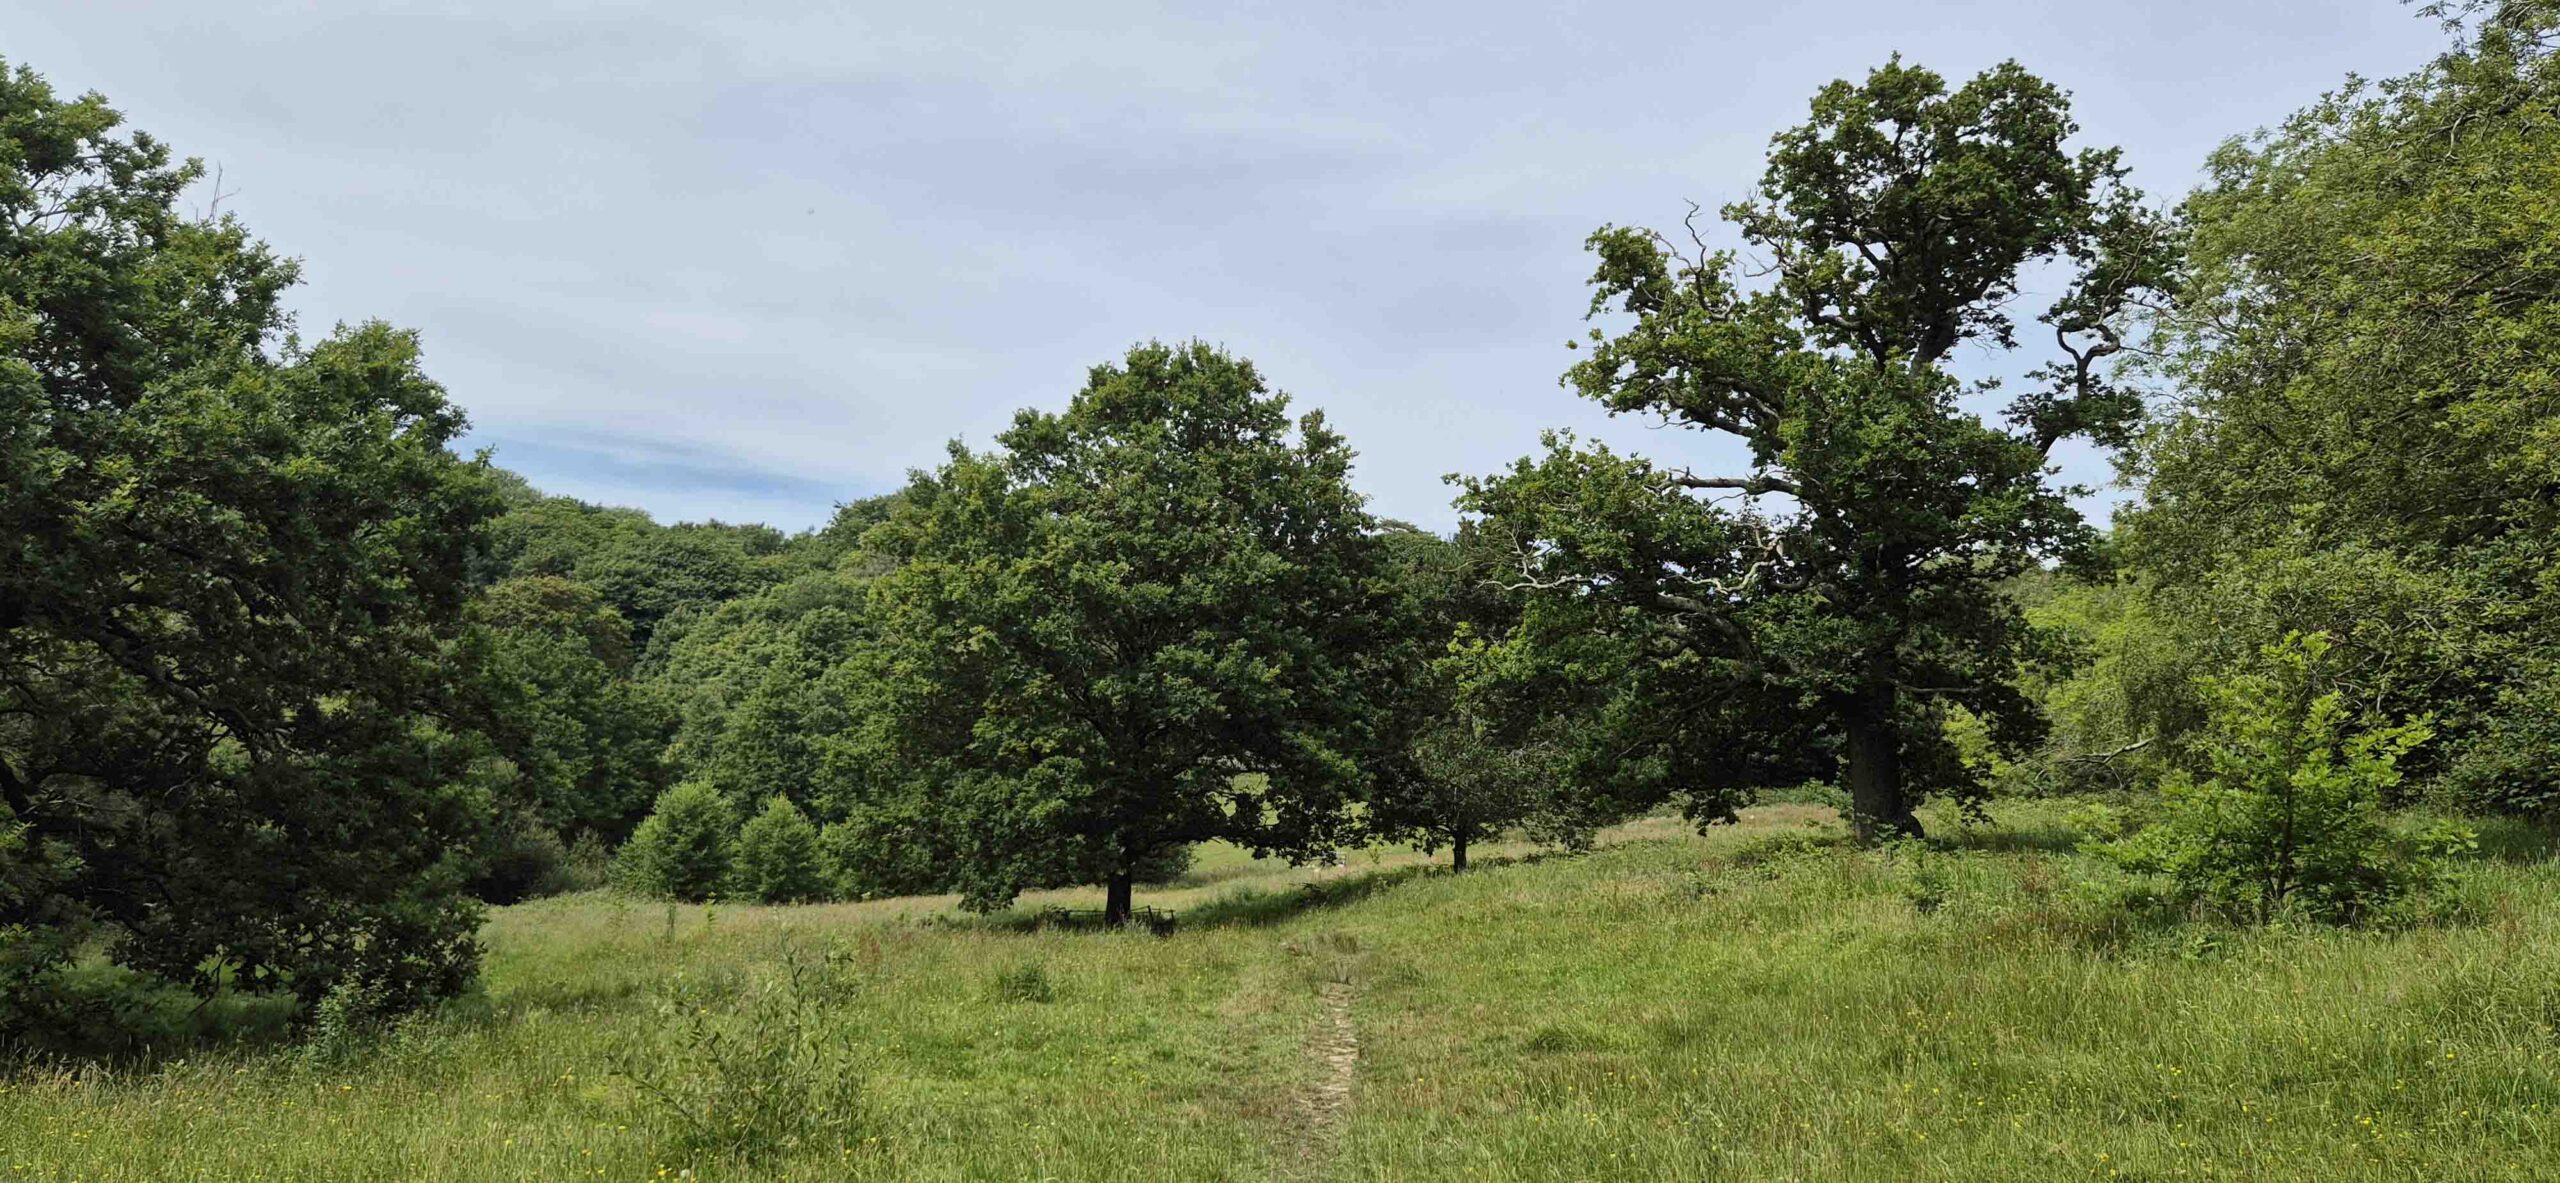 Oak trees and meadows